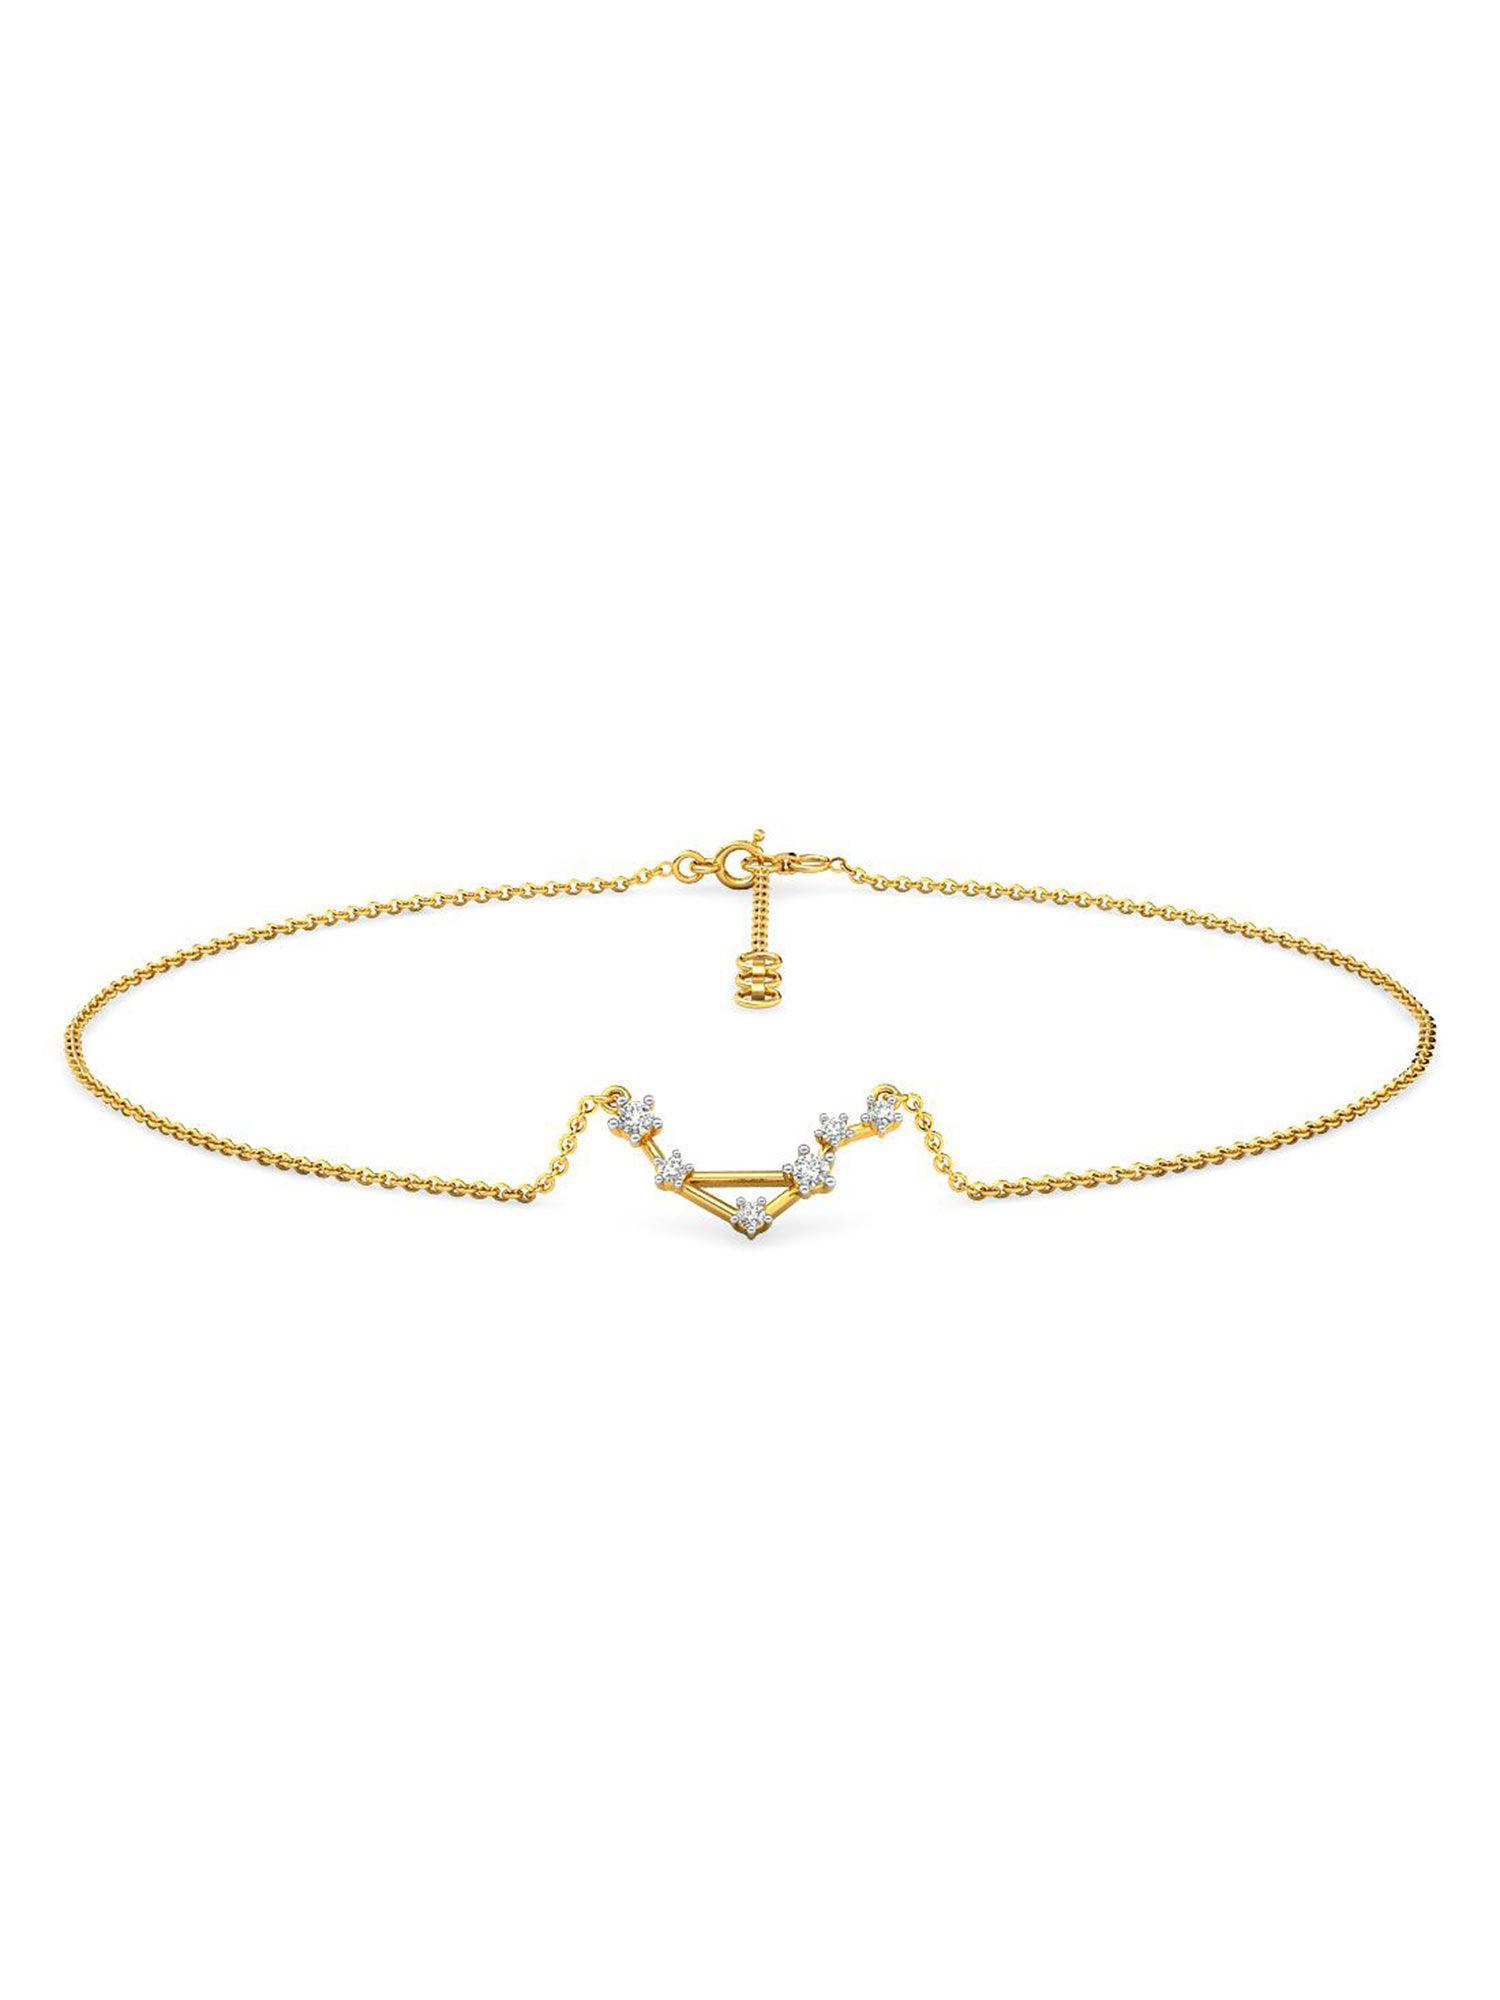 libra 14k yellow gold and diamond anklet for women